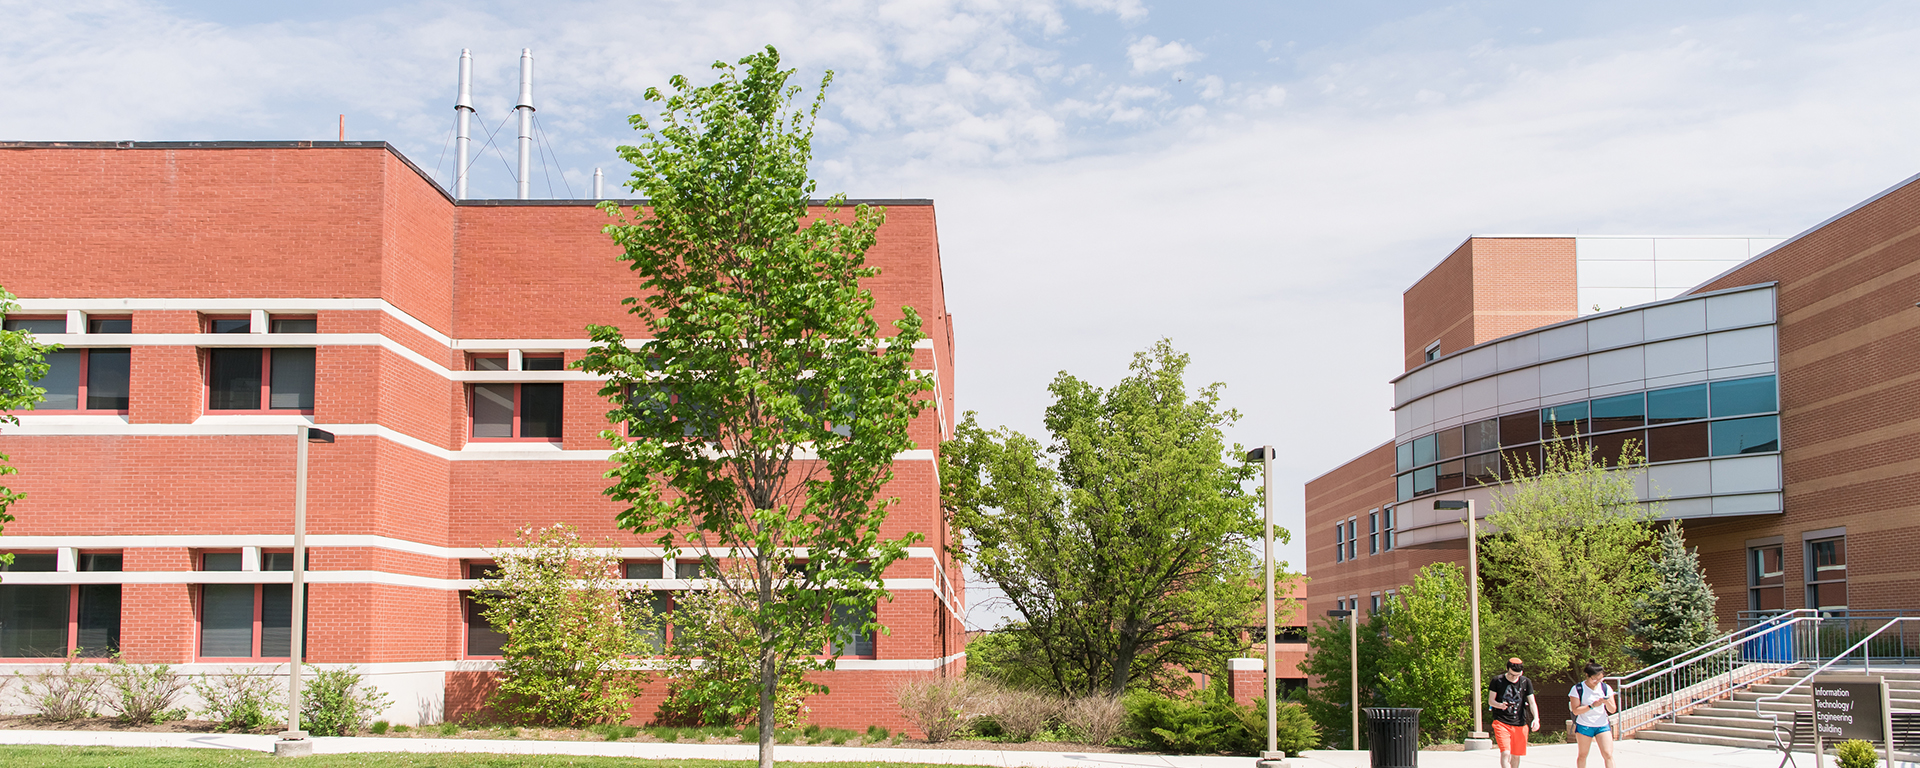 outside view of campus buildings